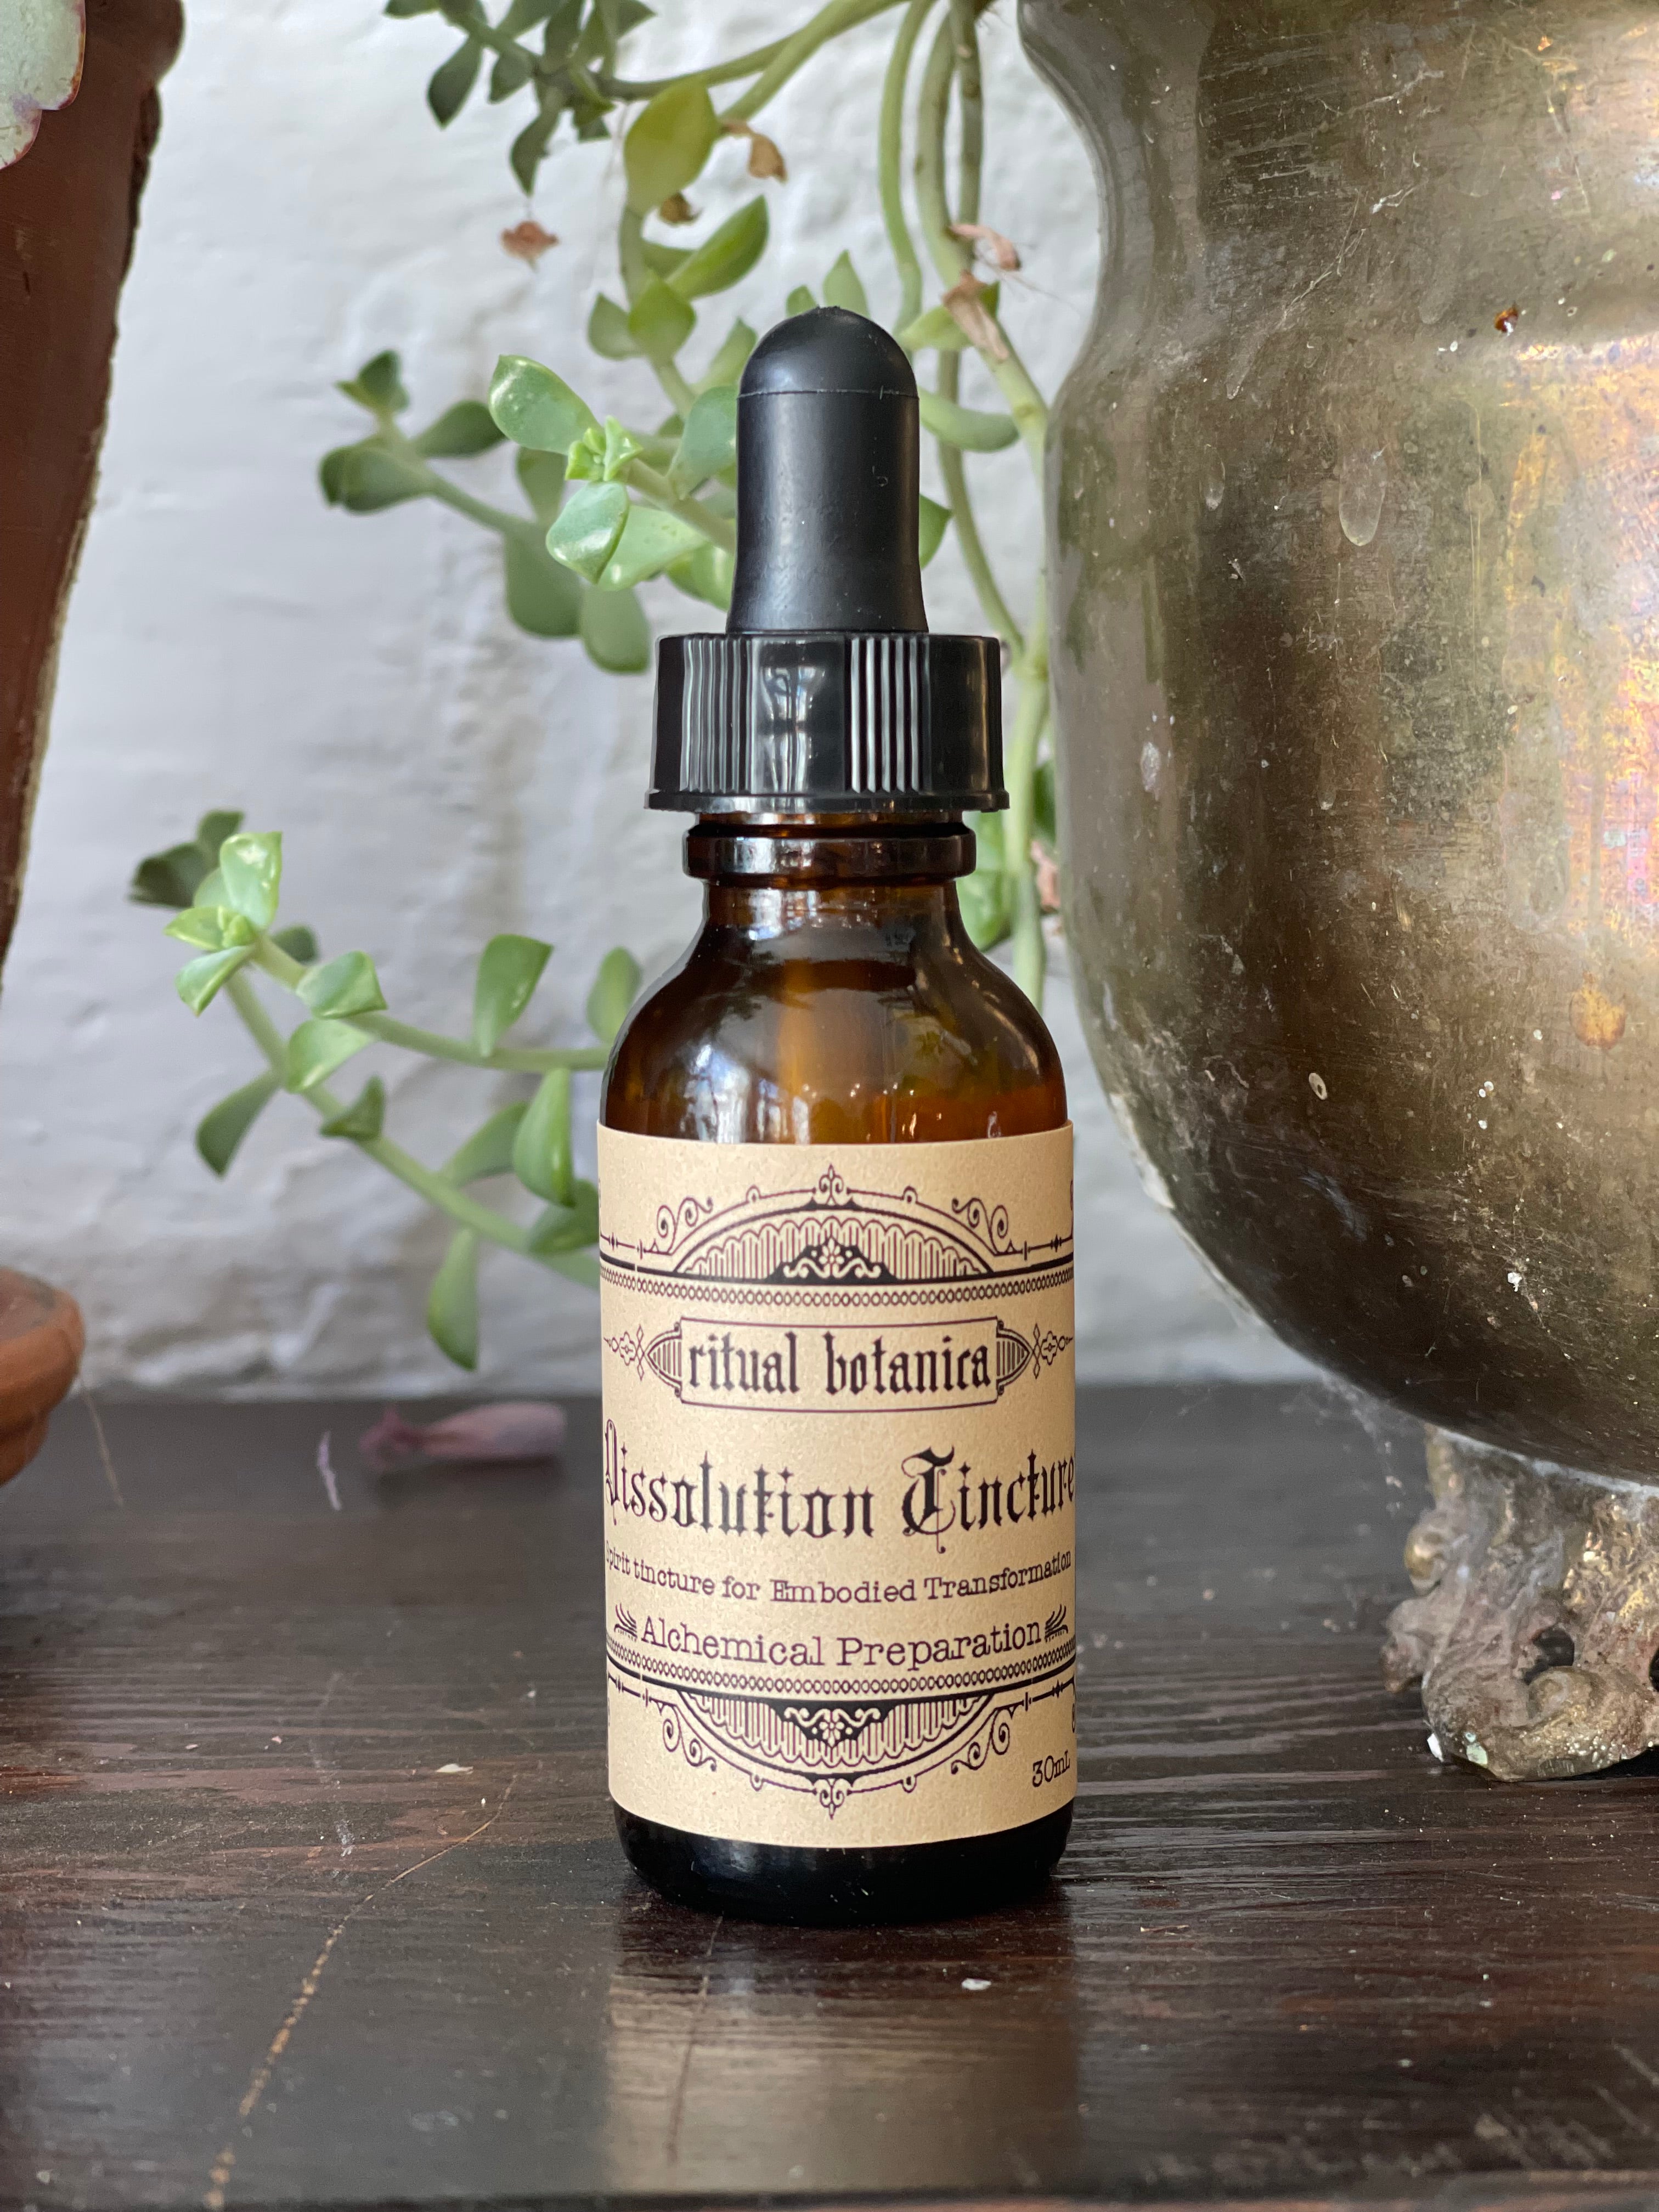 Dissolution Tincture for Embodied Transformation